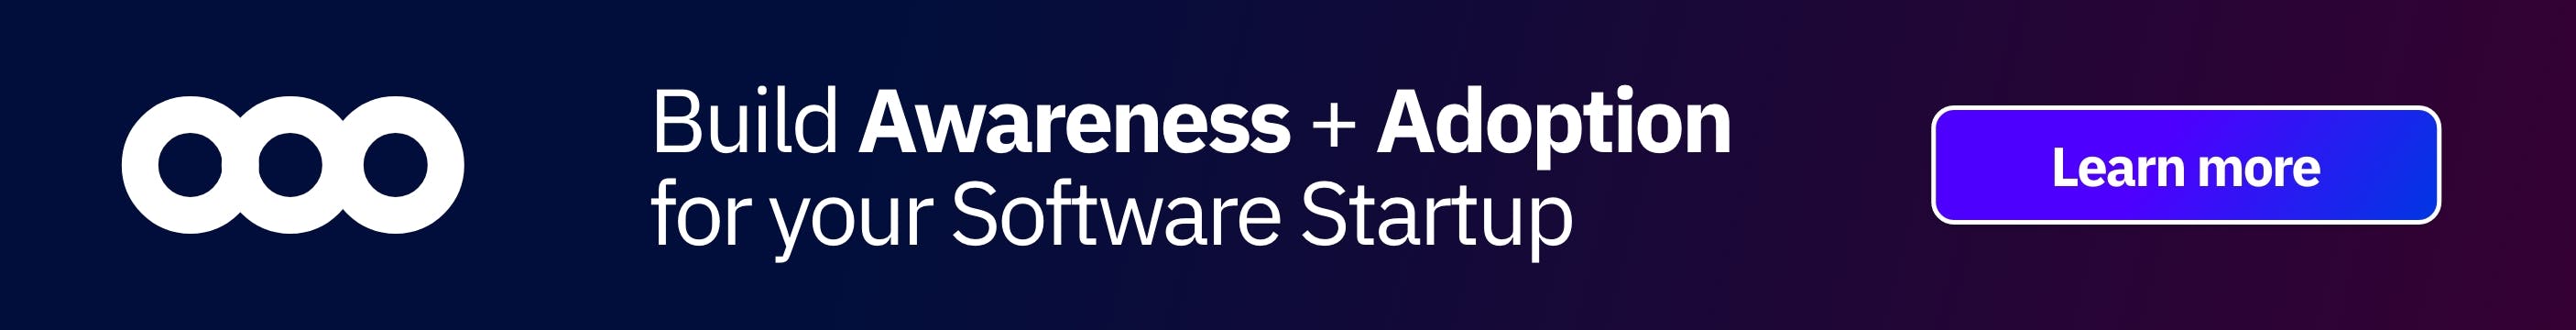 Build awareness and adoption for your software startup with Circuit.